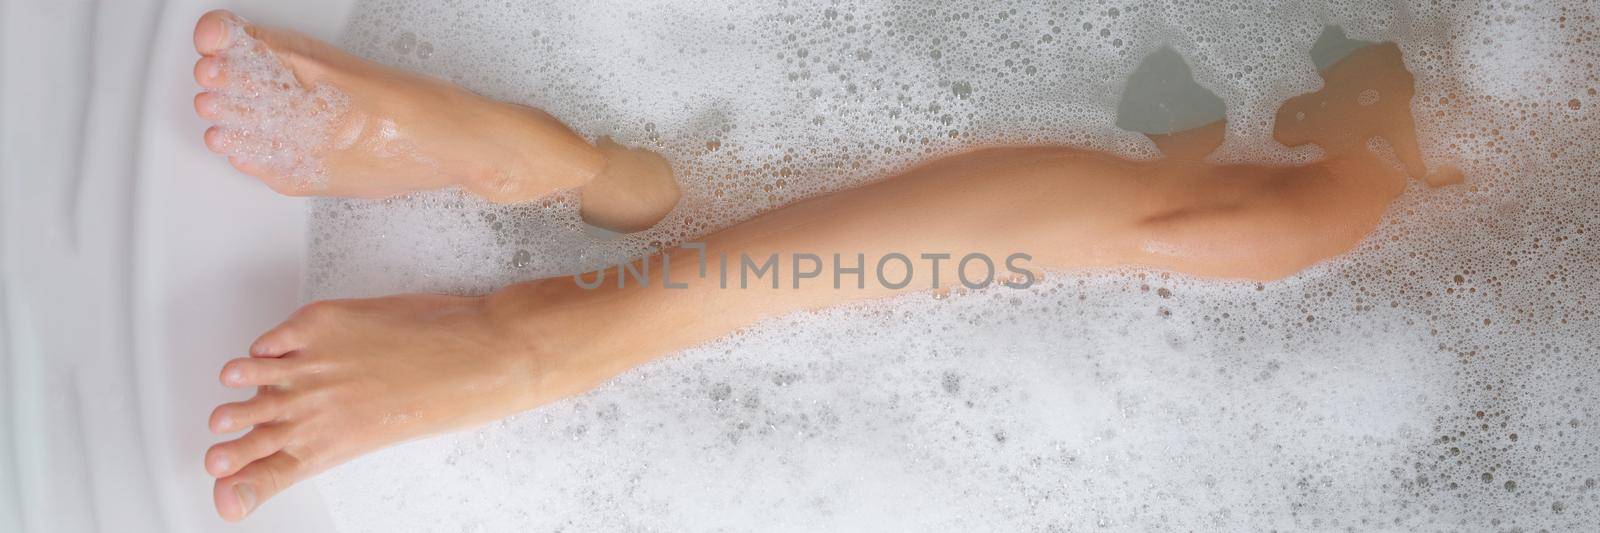 Slender female legs in a bathtub with soapy water by kuprevich